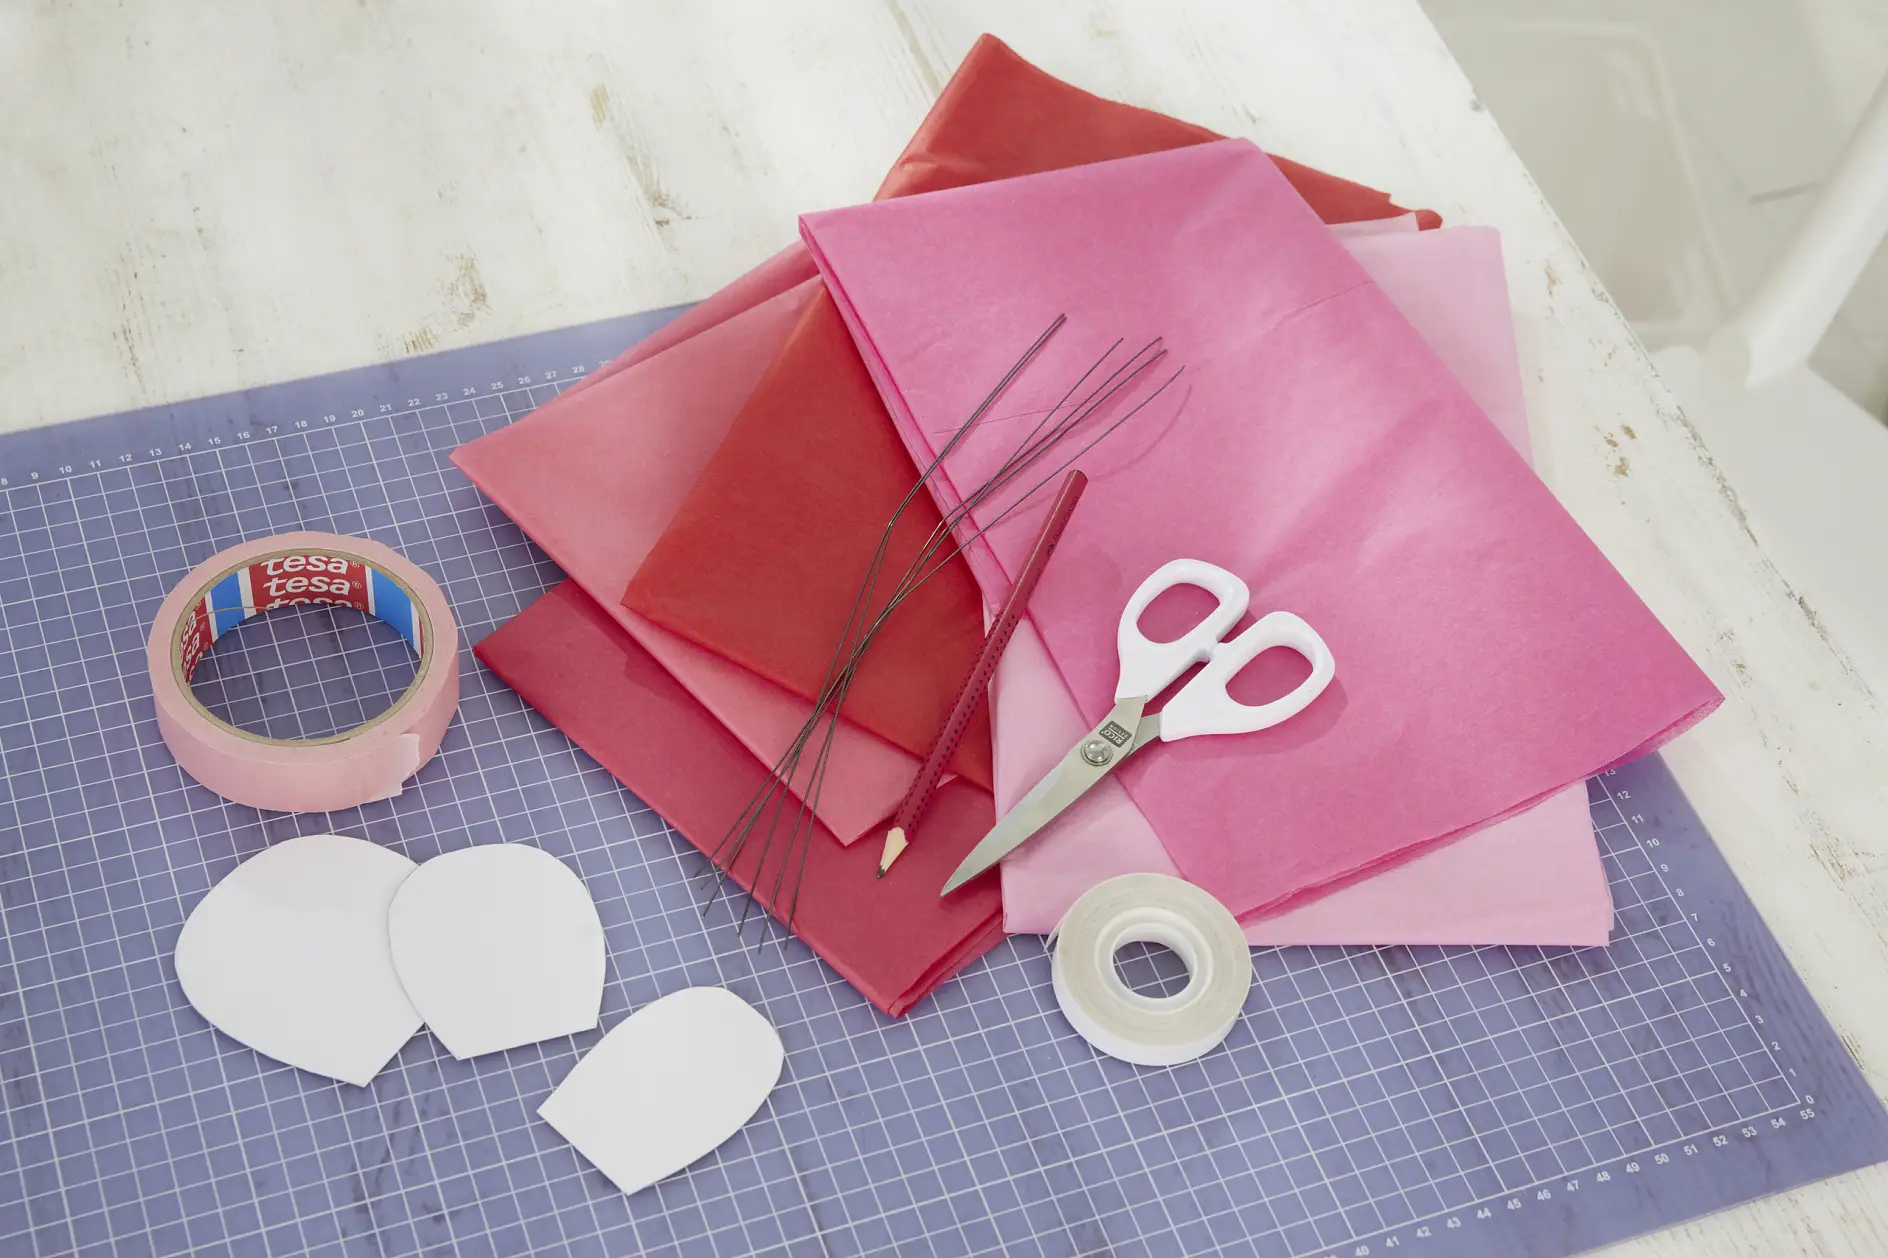 DIY Tissue Paper Rose / Step 1: Overview